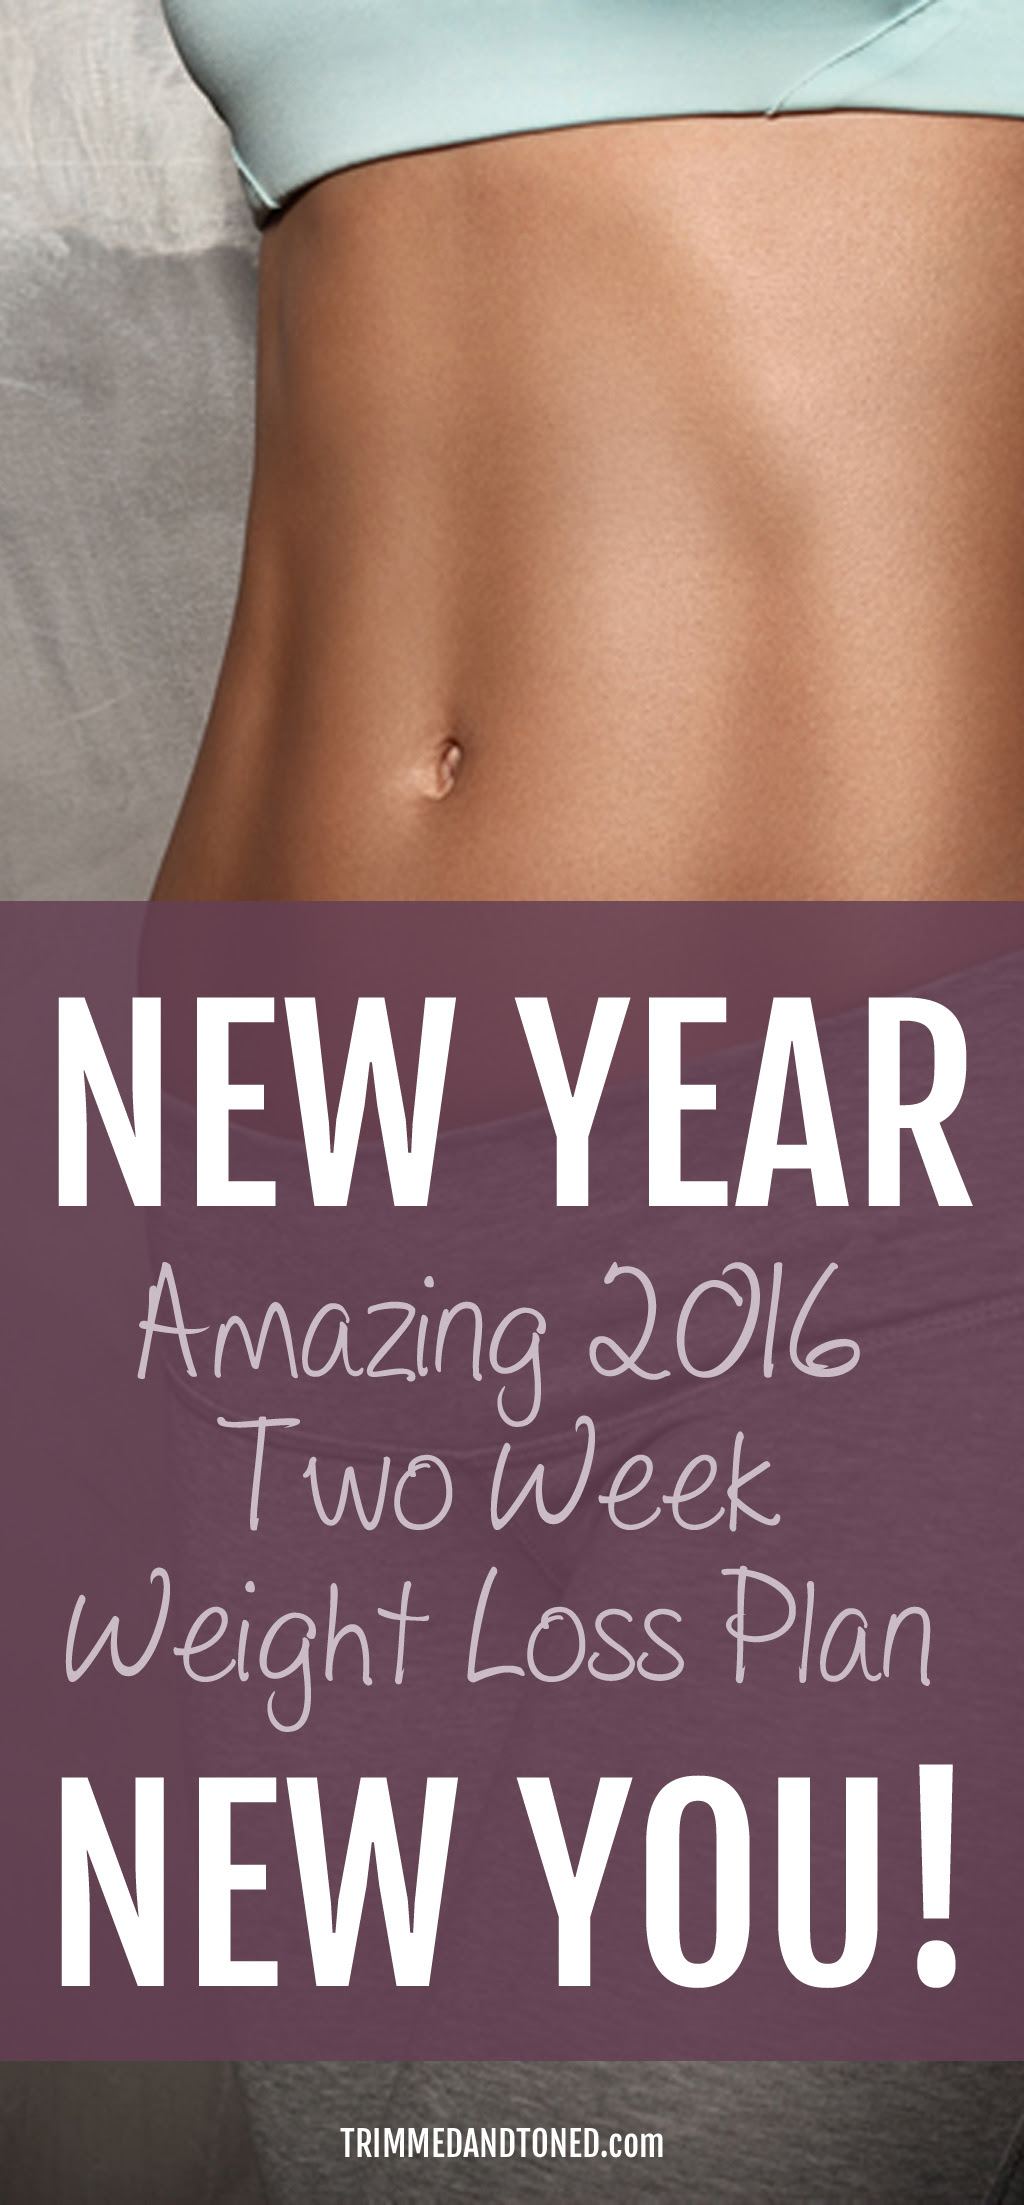 New Year, New You Weight Loss Plan. 2 Weeks To A Slimmer You!